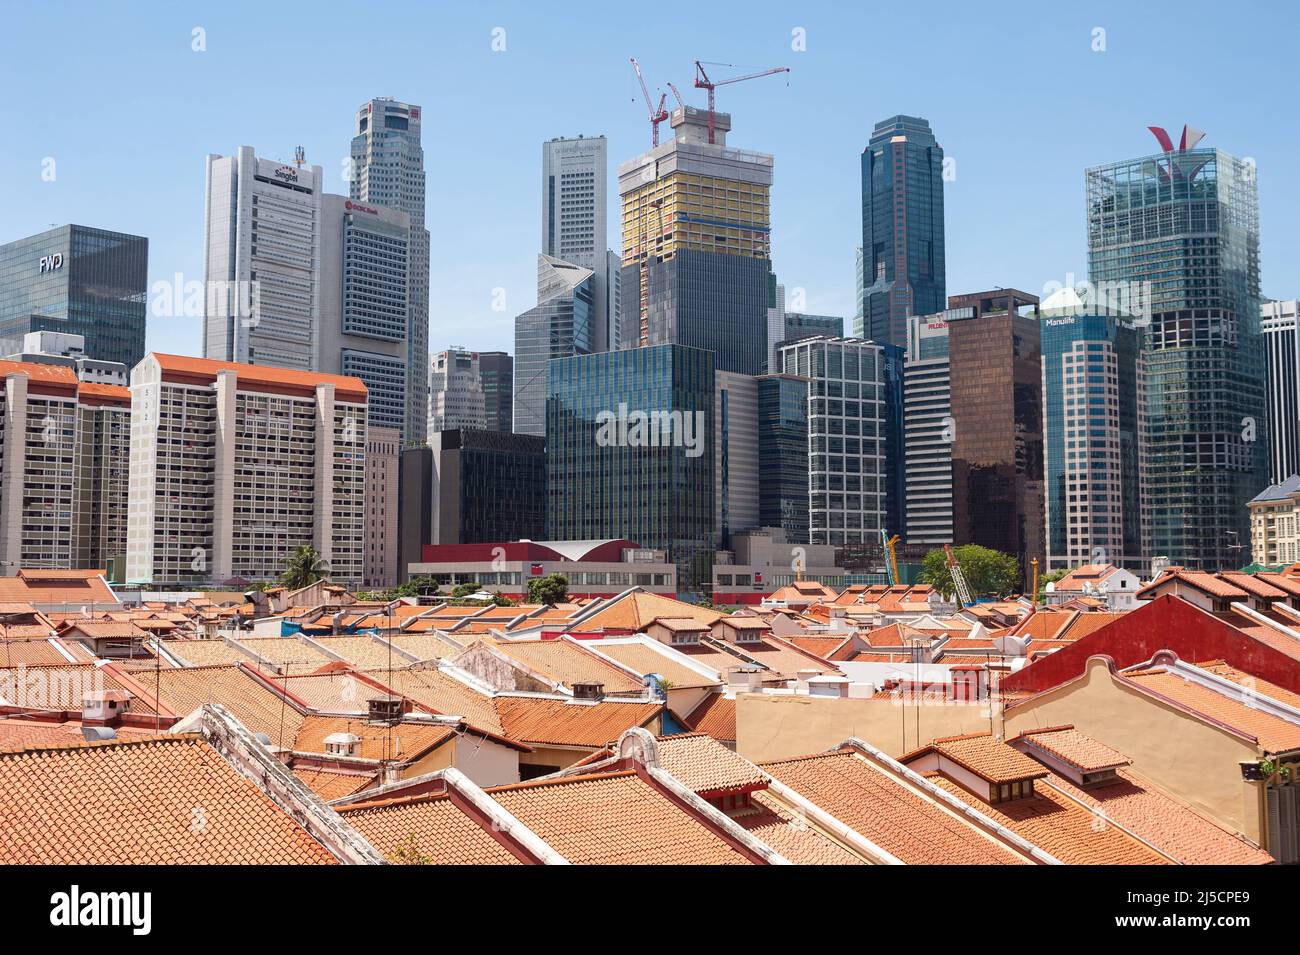 06.07.2020, Singapore, Republic of Singapore, Asia - An elevated view over the roofs of traditional shophouses in Chinatown with the skyscrapers of the business district in the background. After the lifting of curfew, during which most shops closed for over two months amid the Corona pandemic (Covid-19) and public life was severely restricted, the city-state is slowly getting used to the new normal. [automated translation] Stock Photo